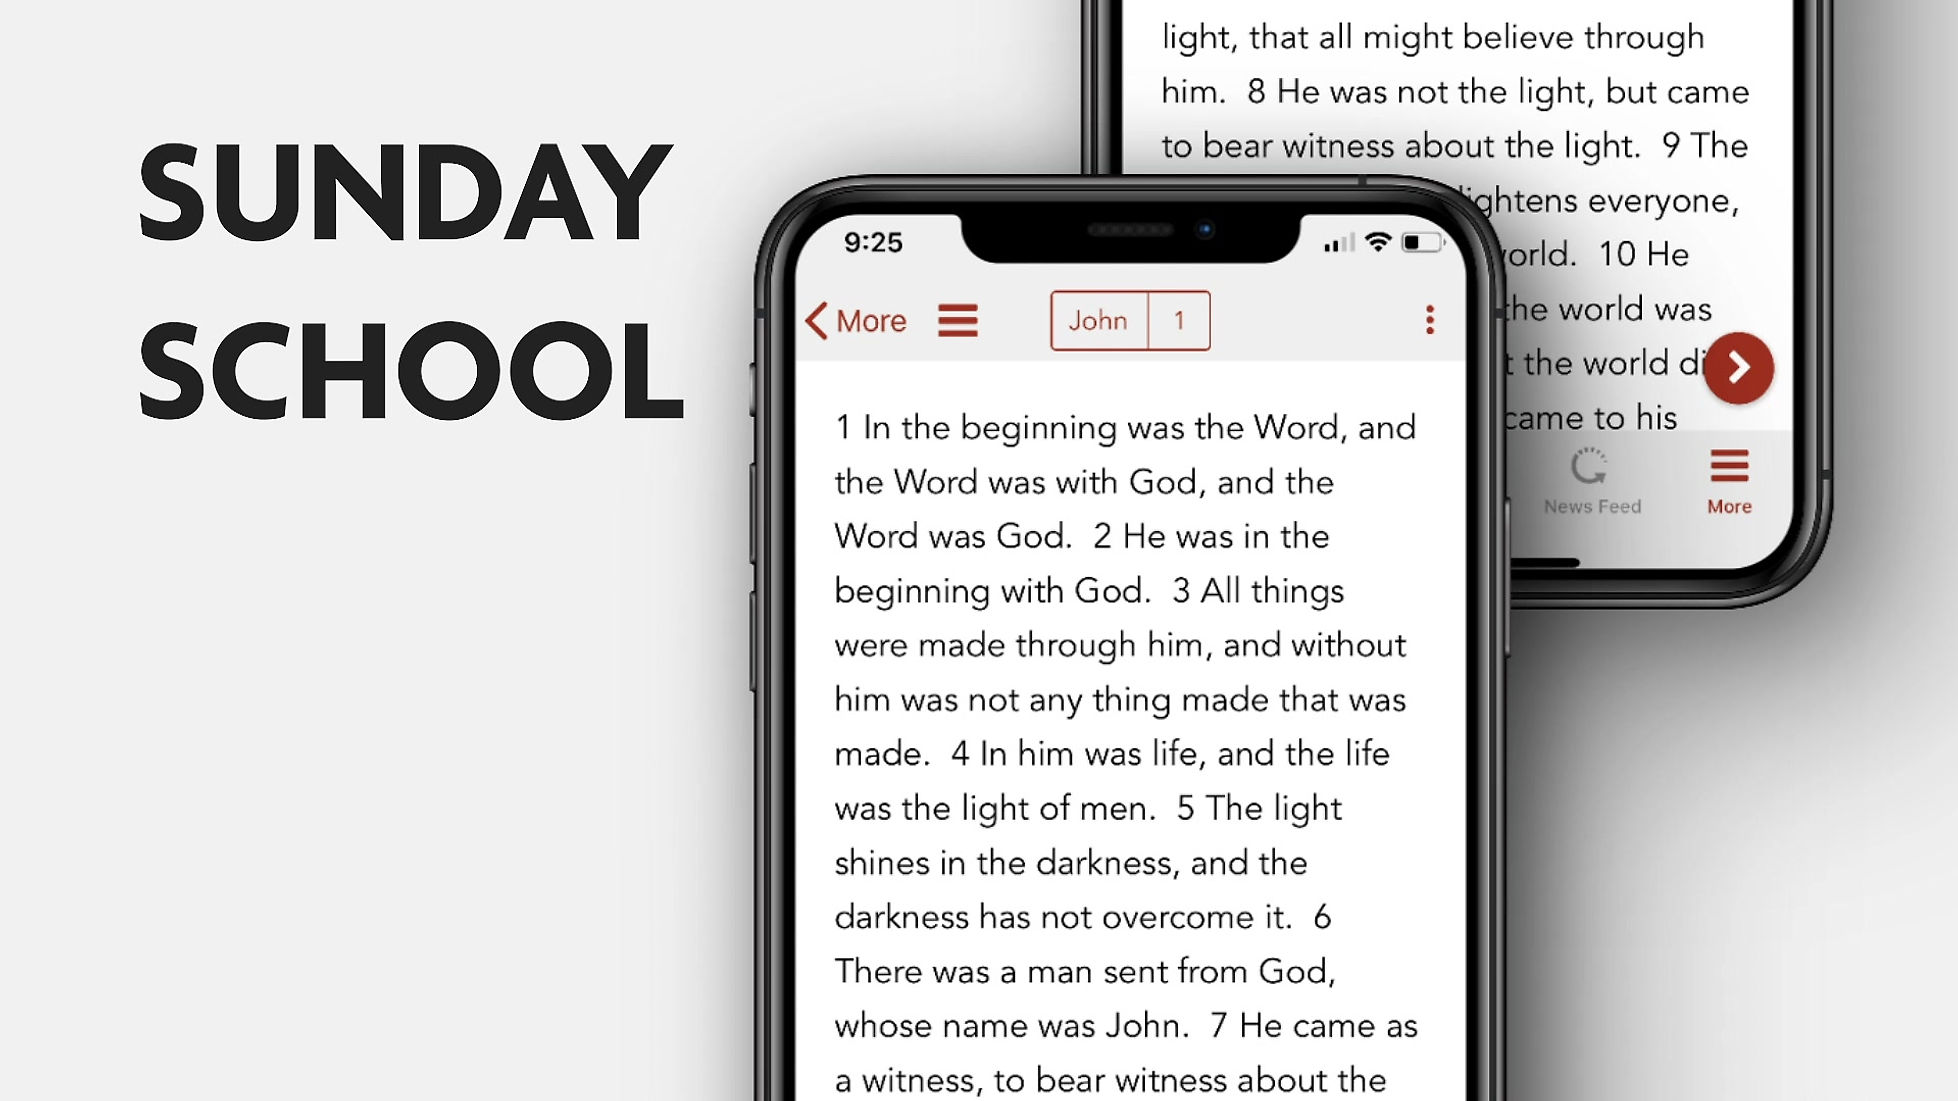 Introducing our Church App!